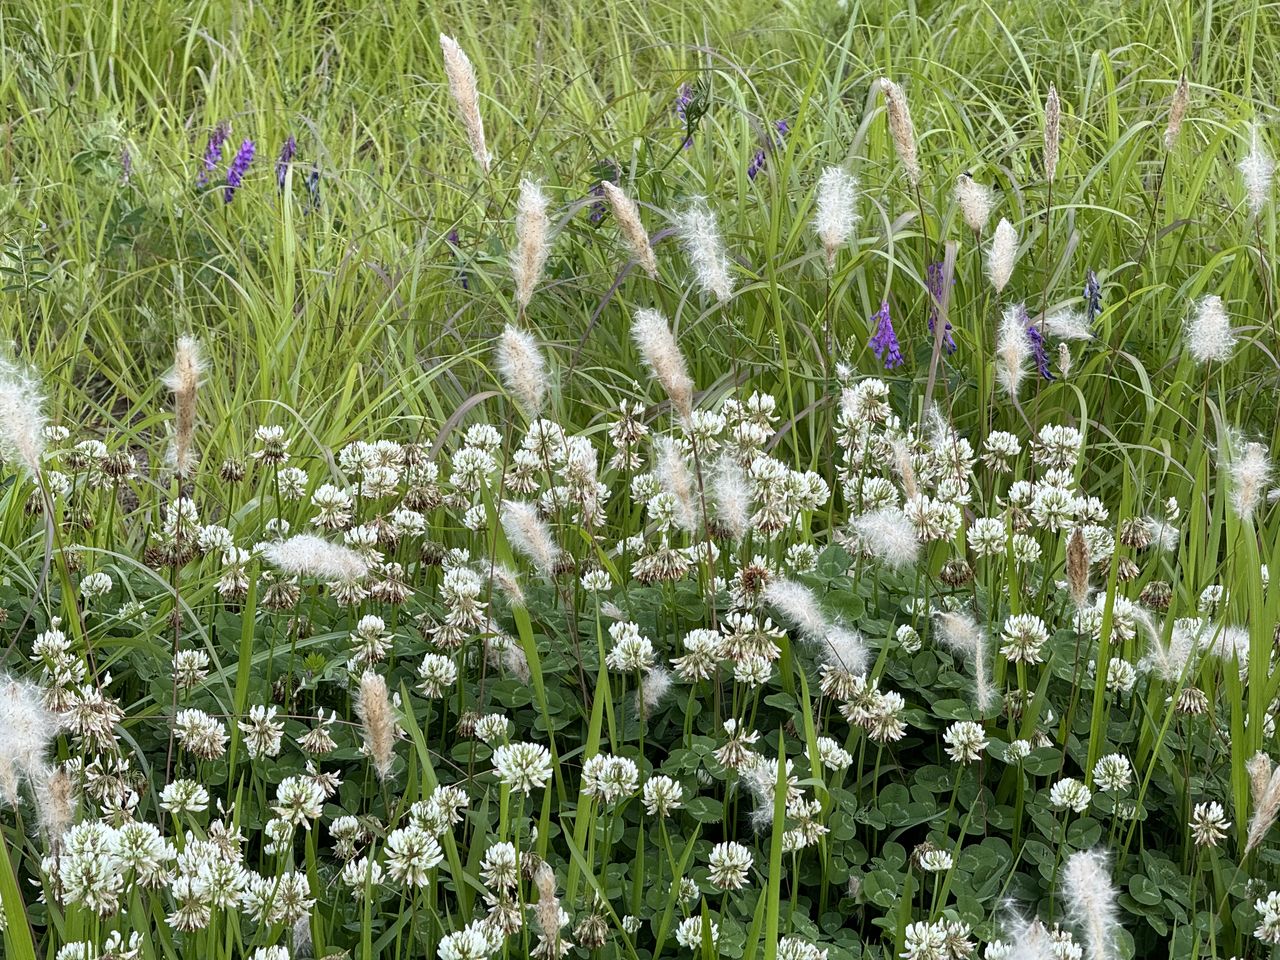 plant, flower, flowering plant, growth, beauty in nature, field, freshness, land, nature, meadow, fragility, white, herb, no people, green, day, grass, prairie, tranquility, wildflower, outdoors, close-up, vegetable, cow parsley, high angle view, springtime